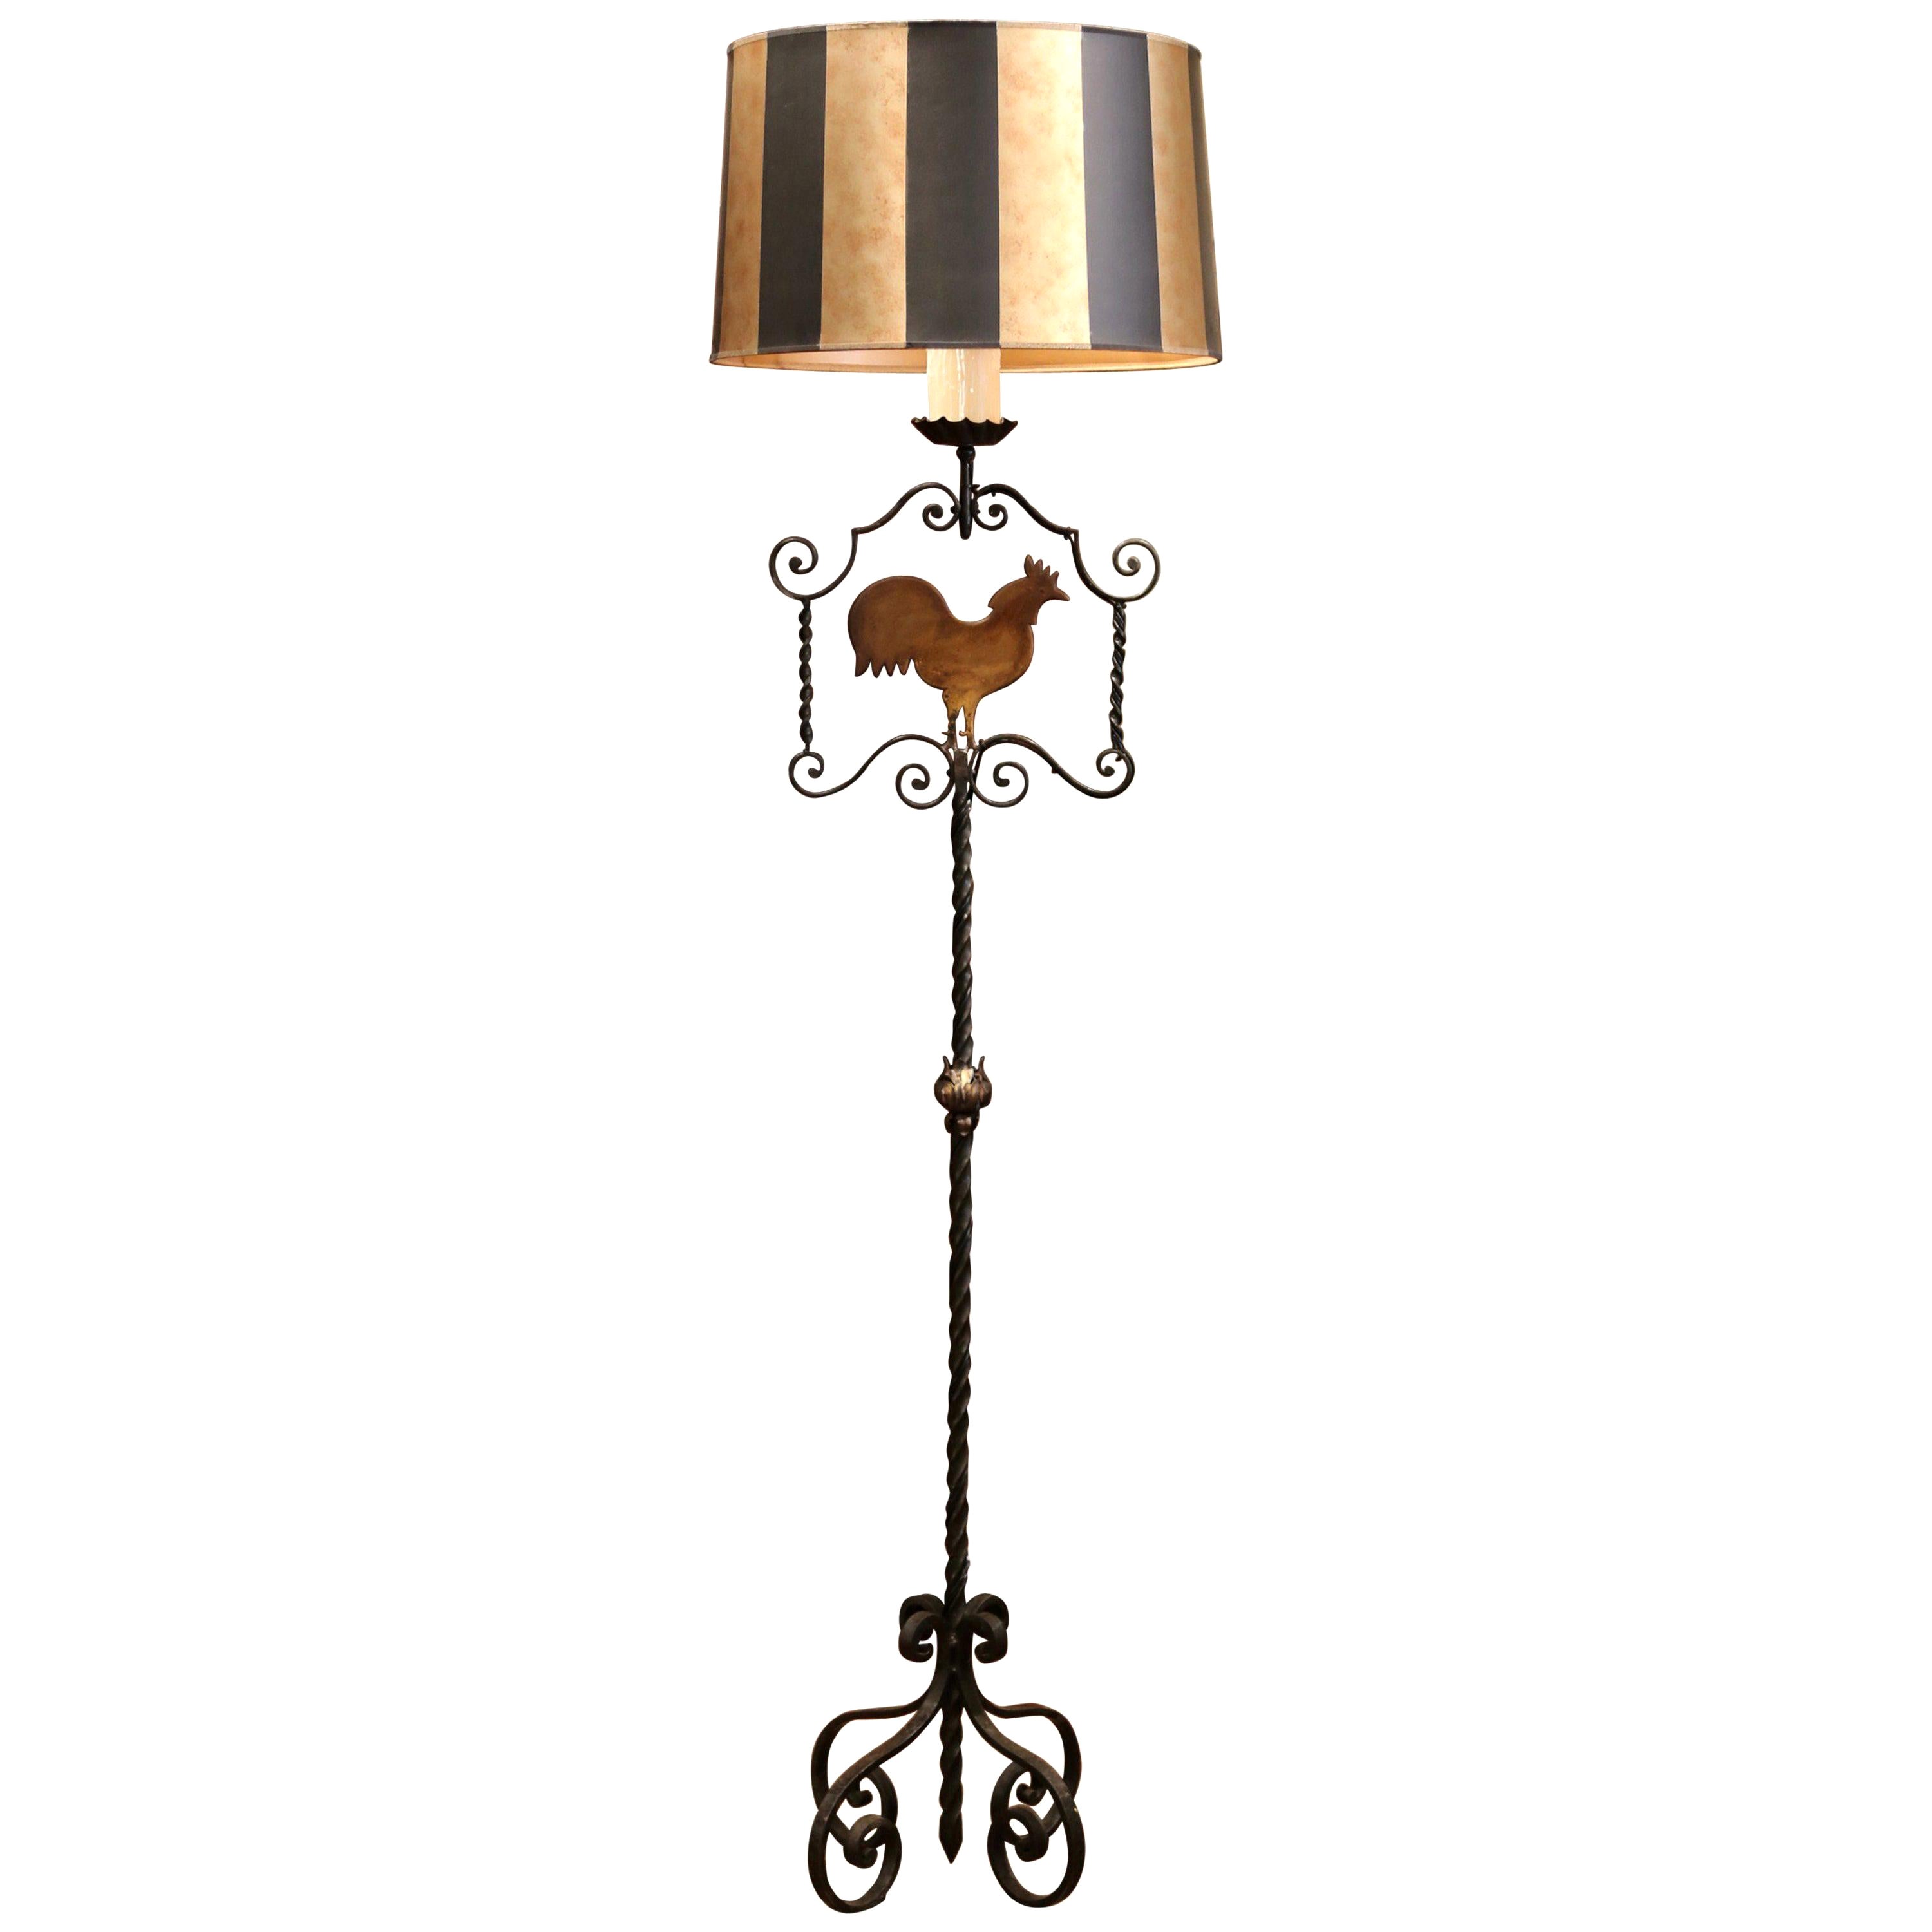 Early 20th Century French Forged Iron Floor Lamp with Rooster Decor For Sale